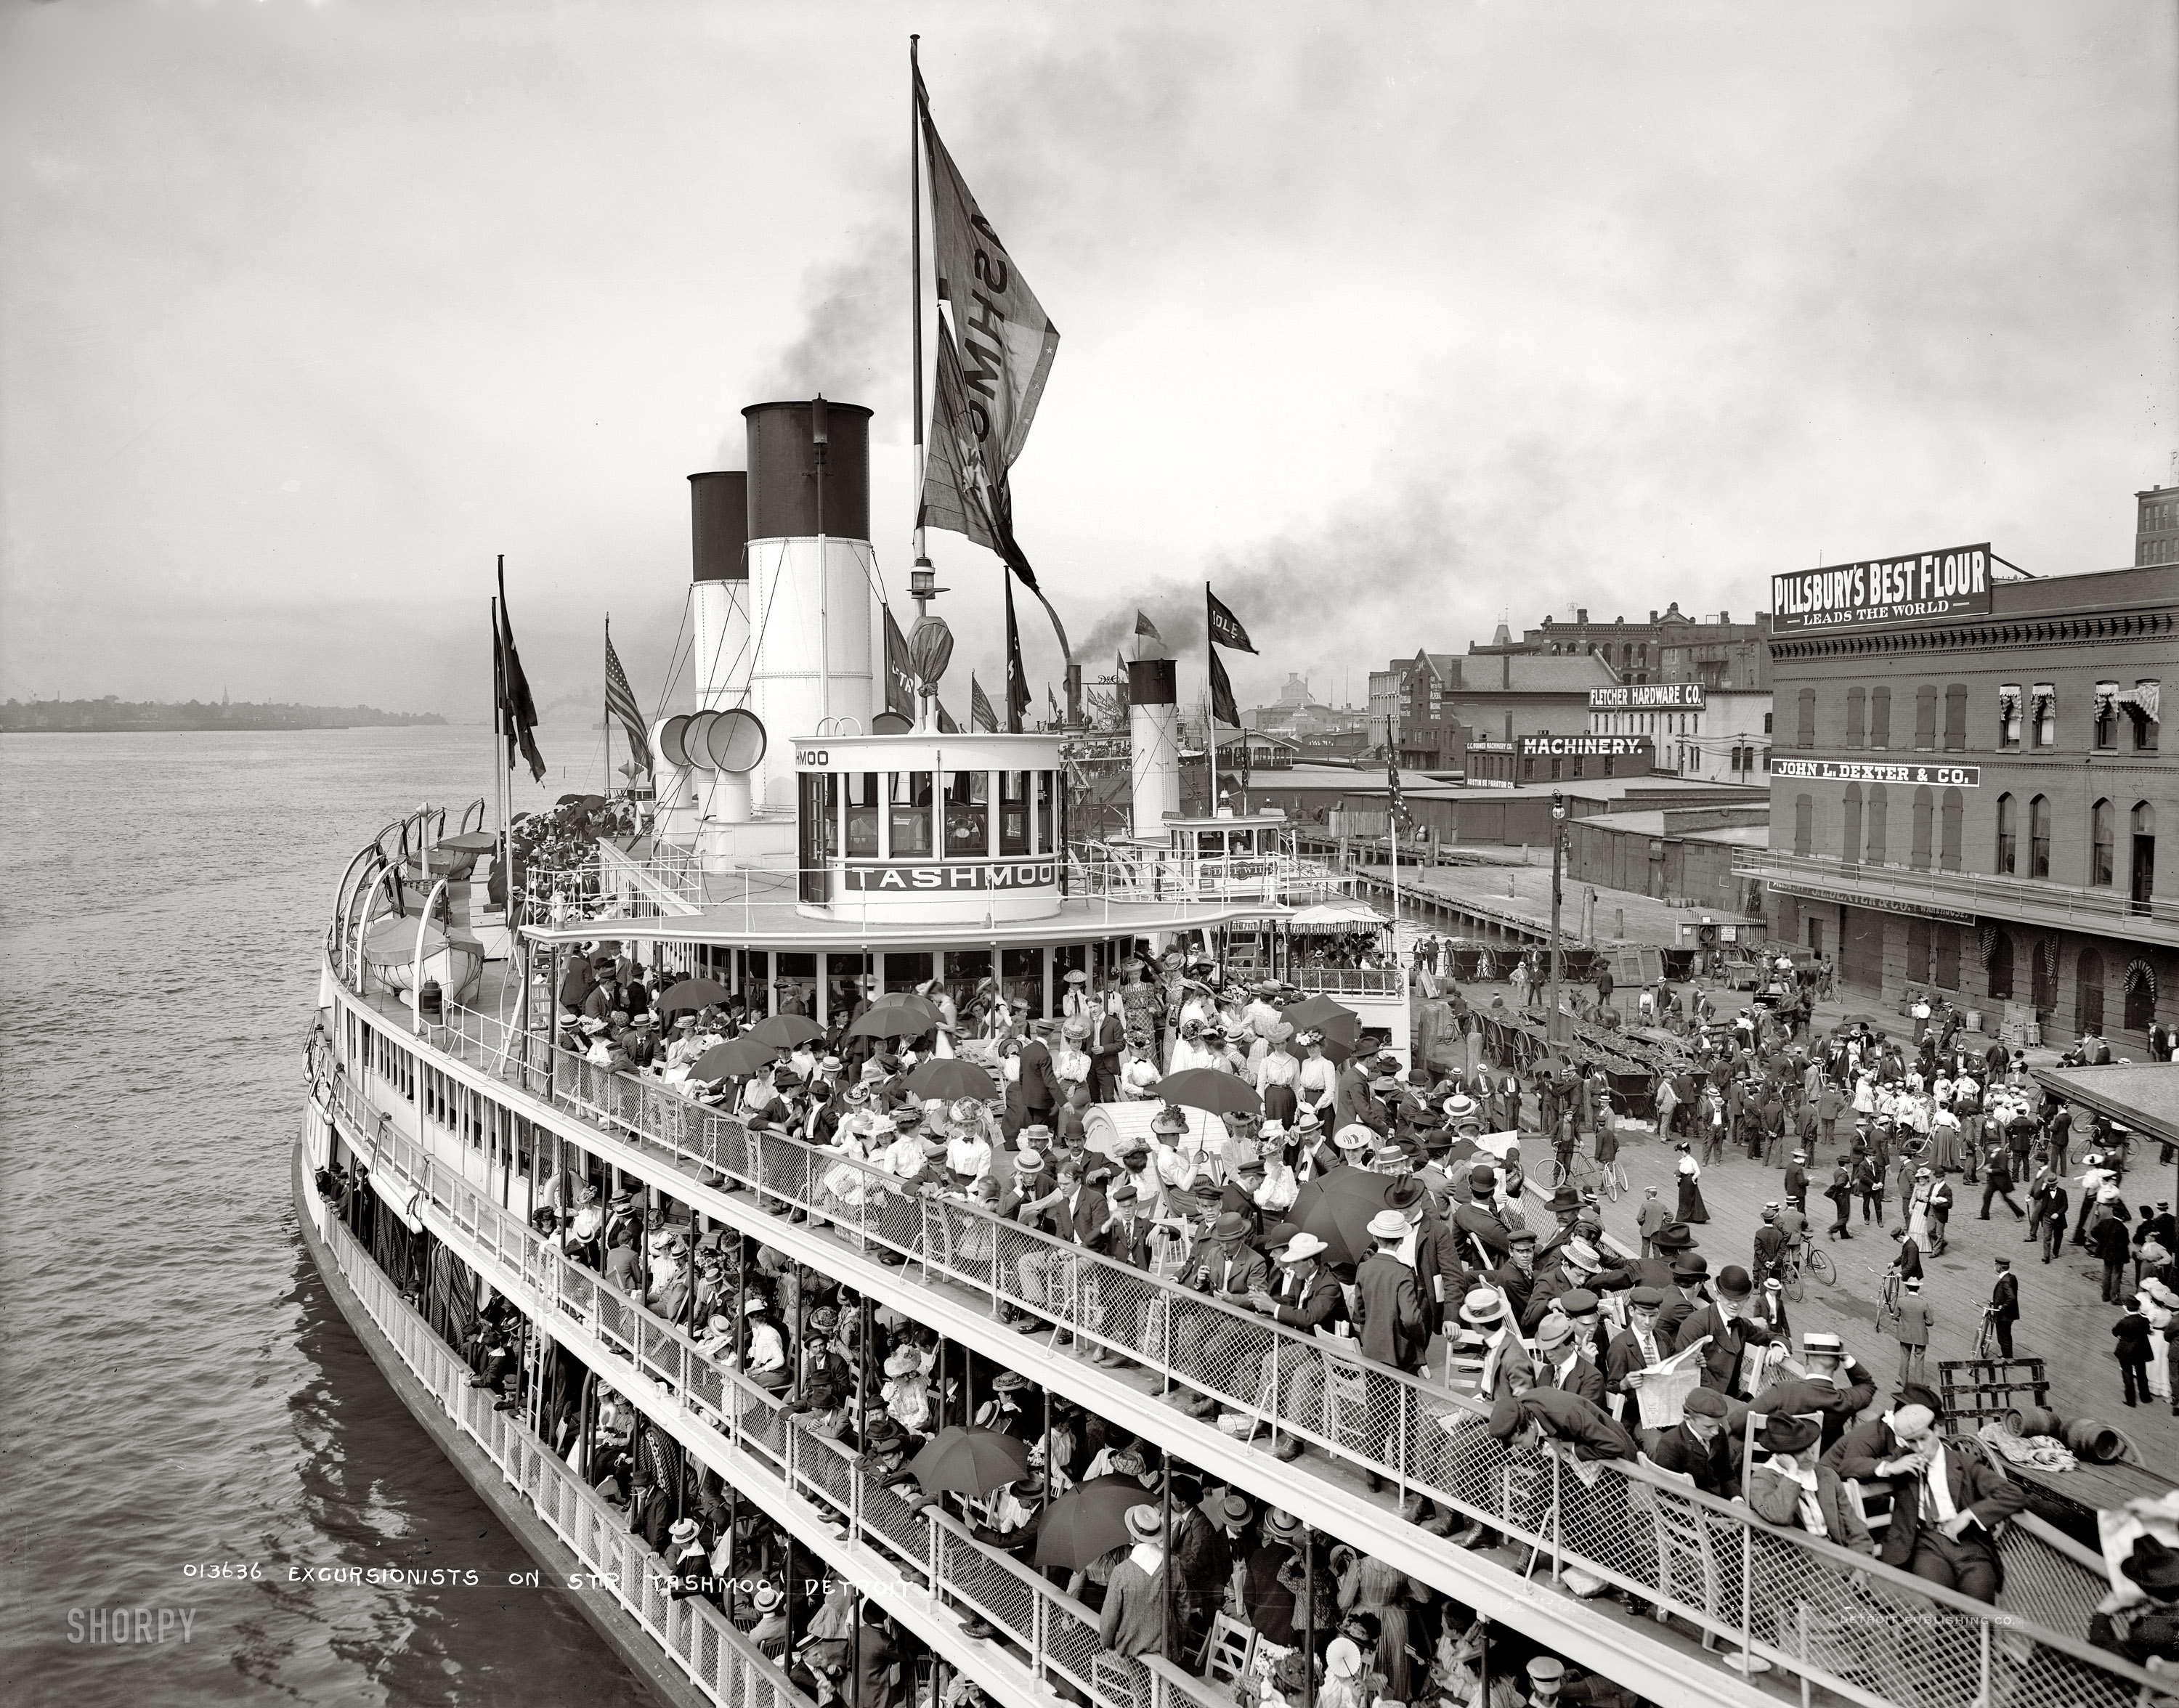 Detroit, Michigan, circa 1900. "Excursionists on steamer Tashmoo." 8x10 inch dry plate glass negative, Detroit Publishing Company. View full size.